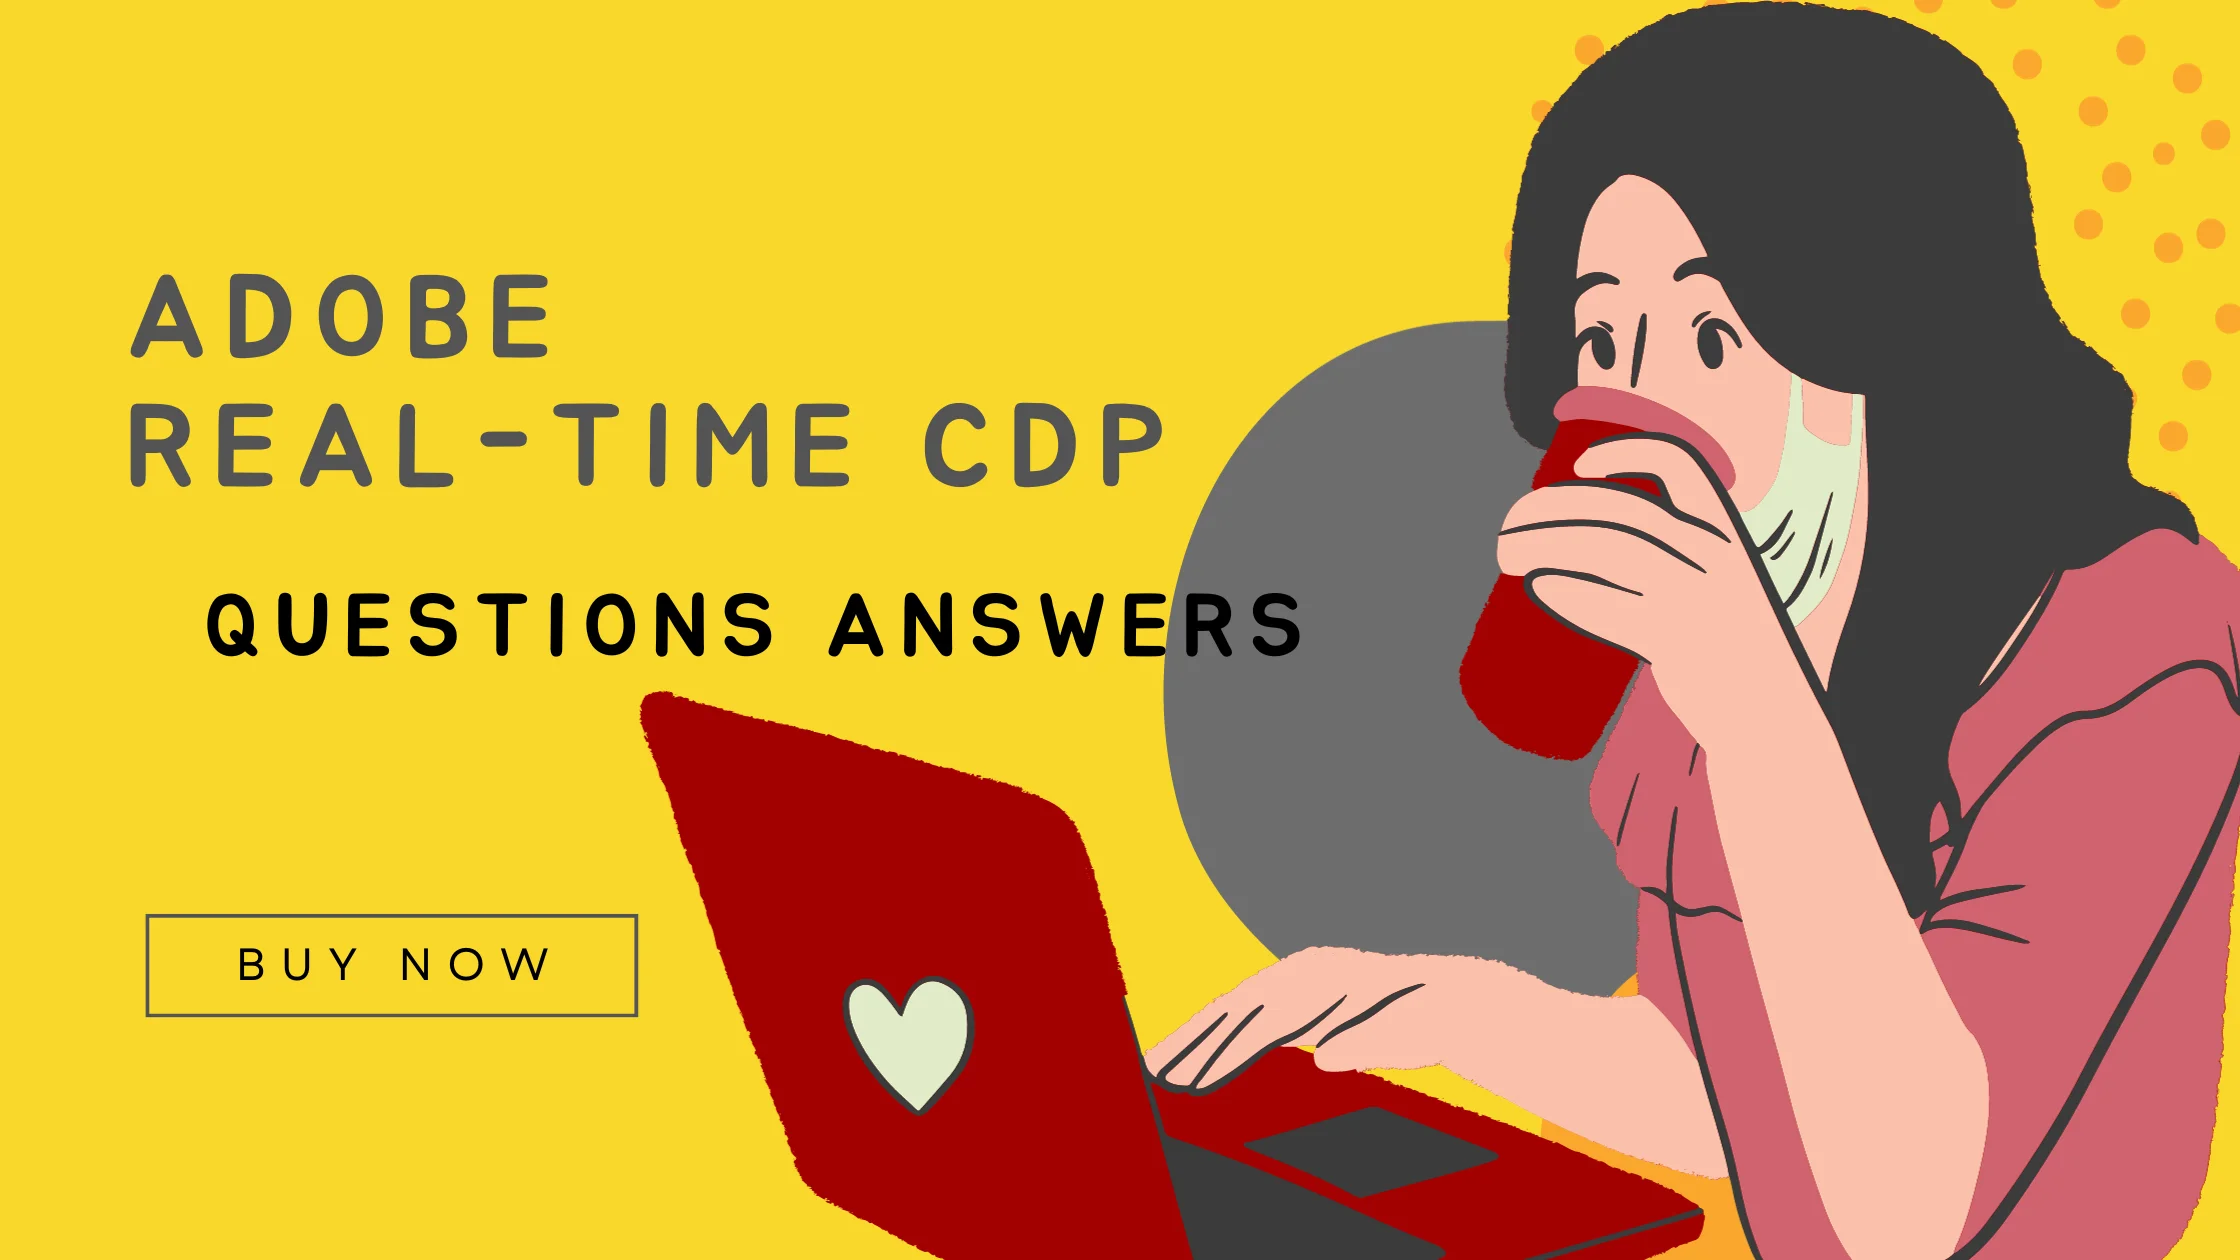 Real-Time CDP promotion